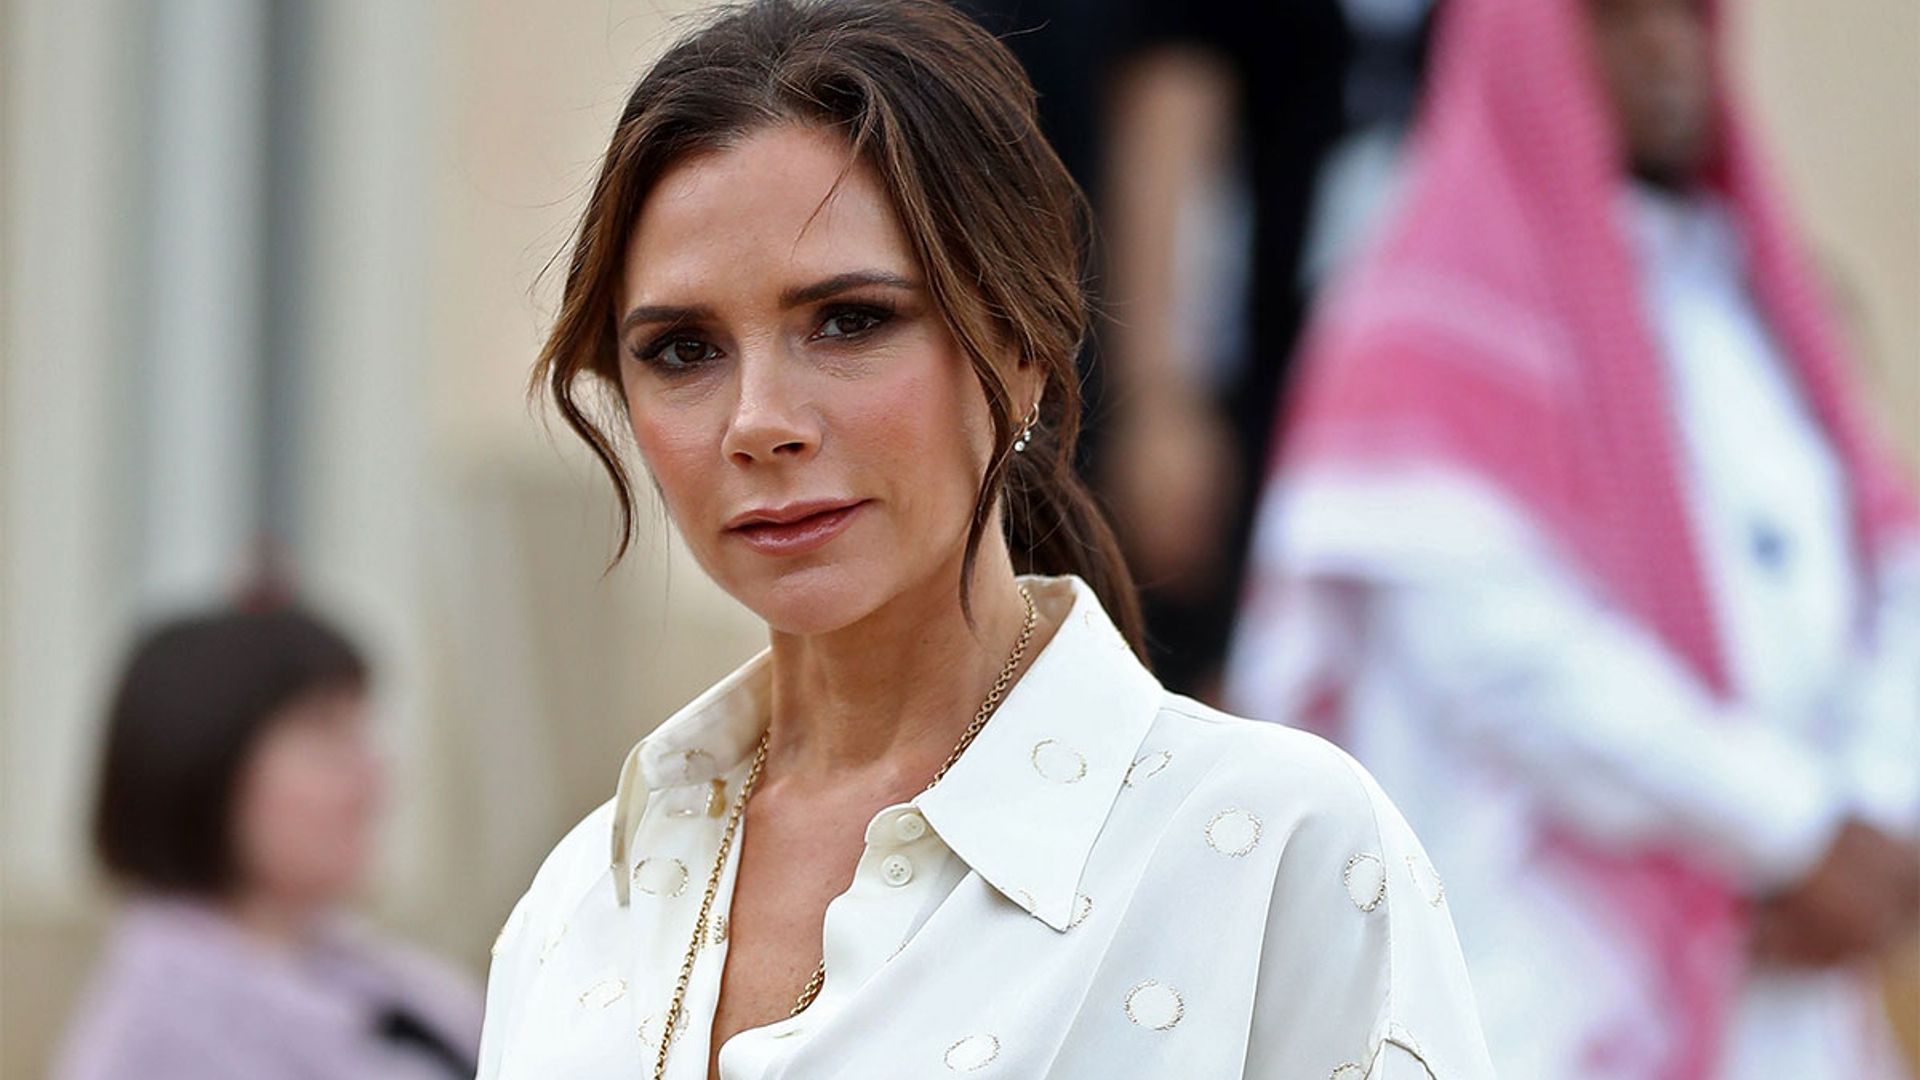 Victoria Beckham's workout outfits are just as chic as you would expect